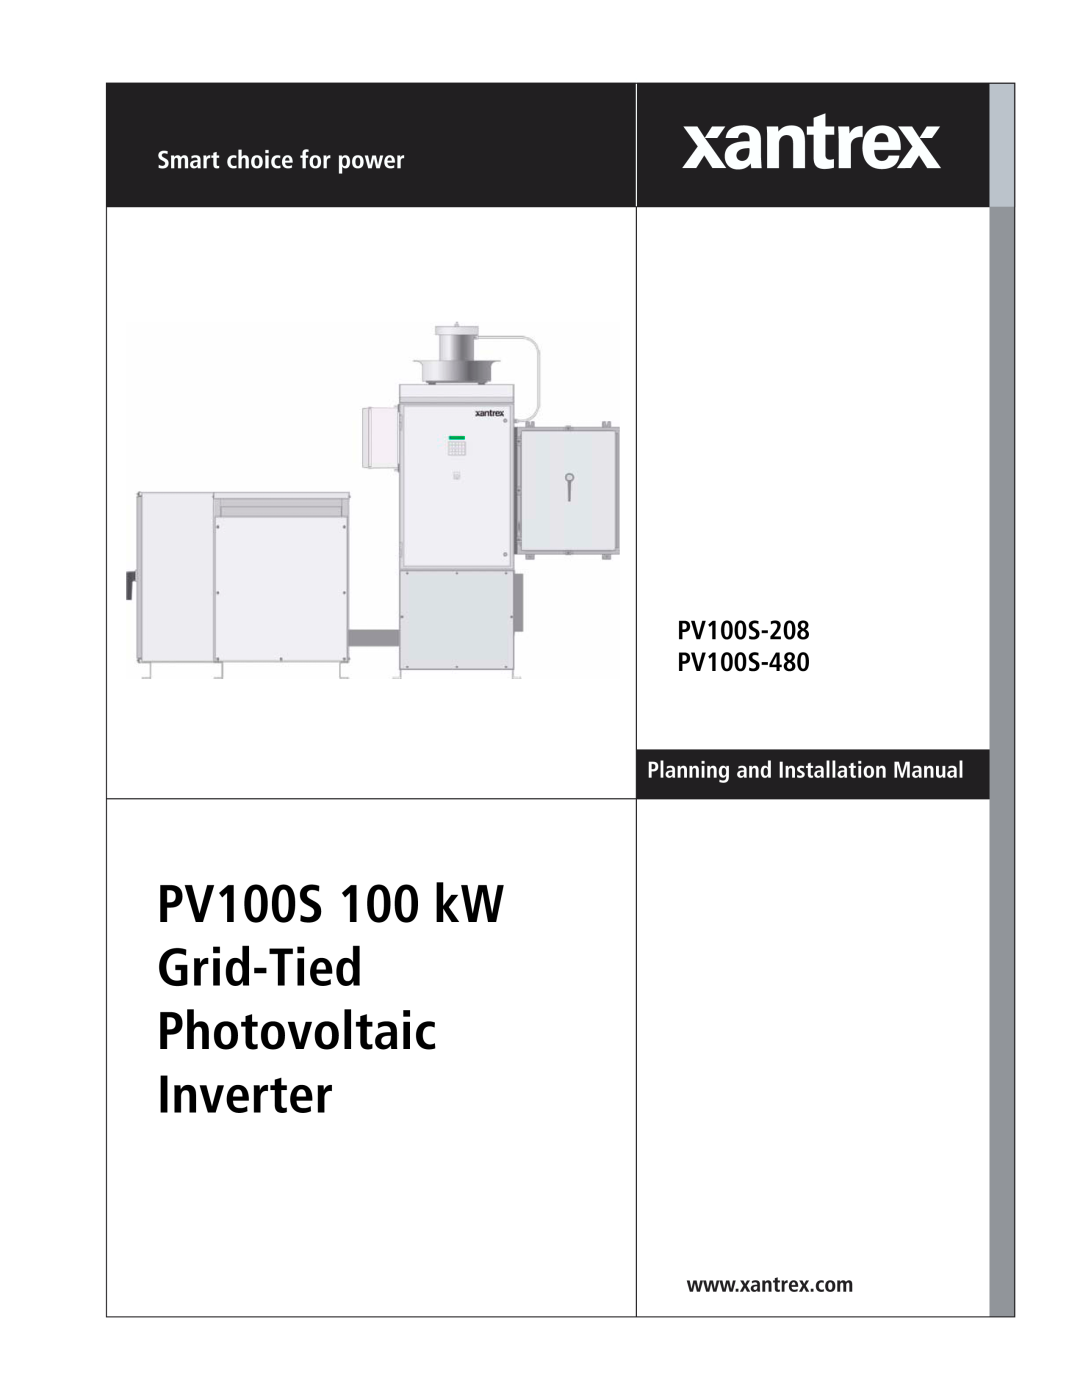 Xantrex Technology installation manual PV100S 100 kW Grid-Tied Photovoltaic Inverter, PV100S-208 PV100S-480 